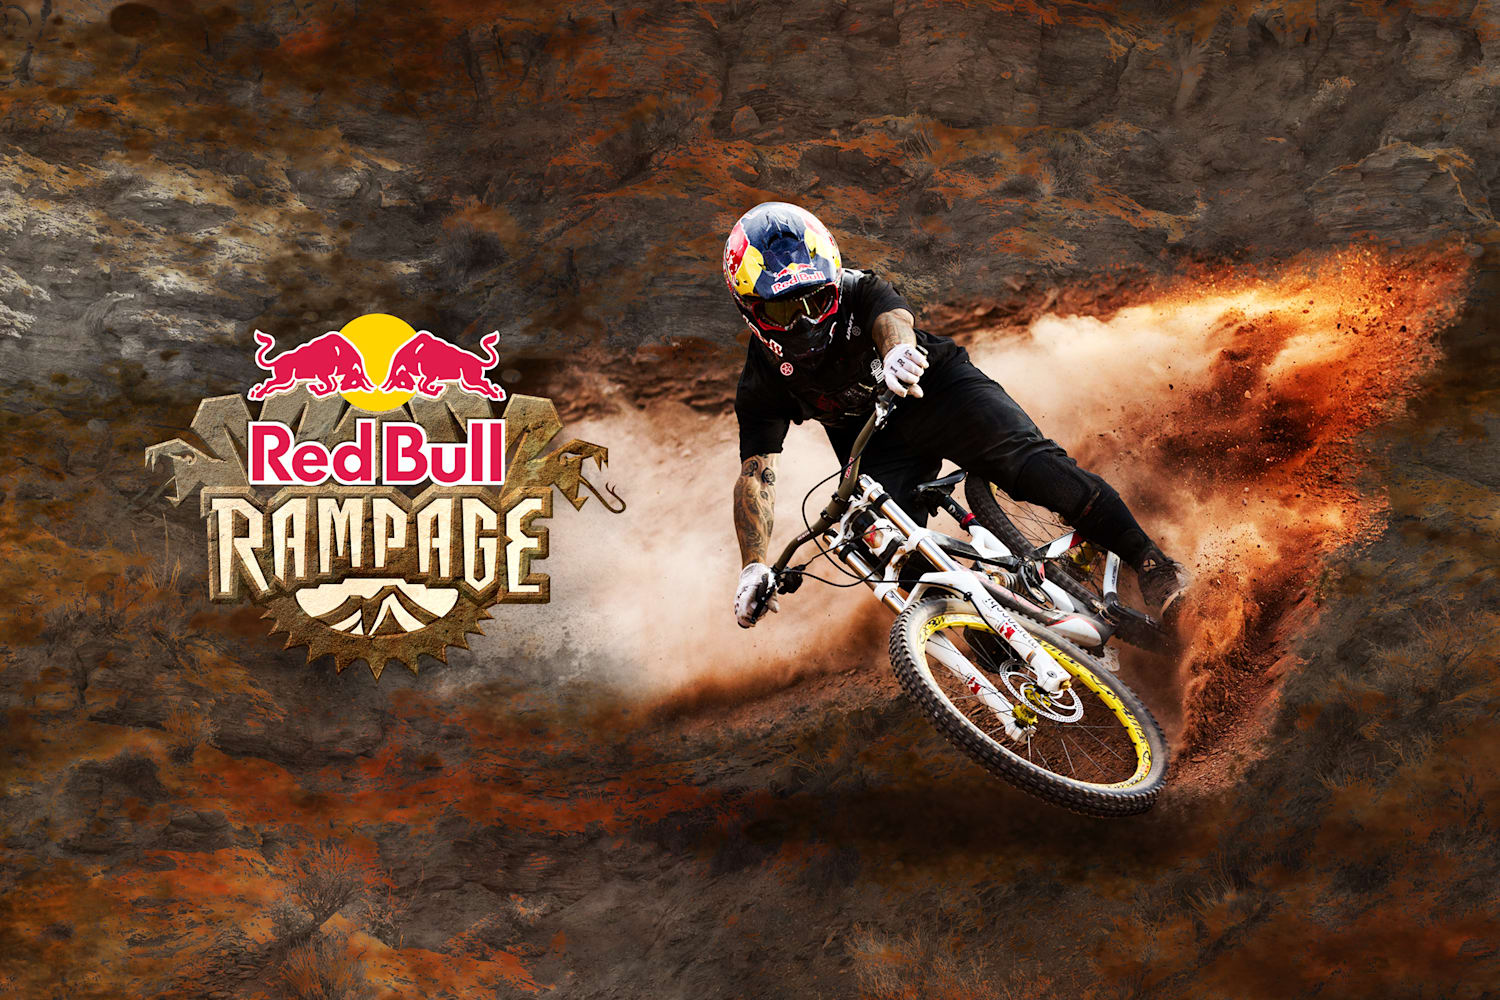 Red Bull Rampage Stories, Videos and Event Info